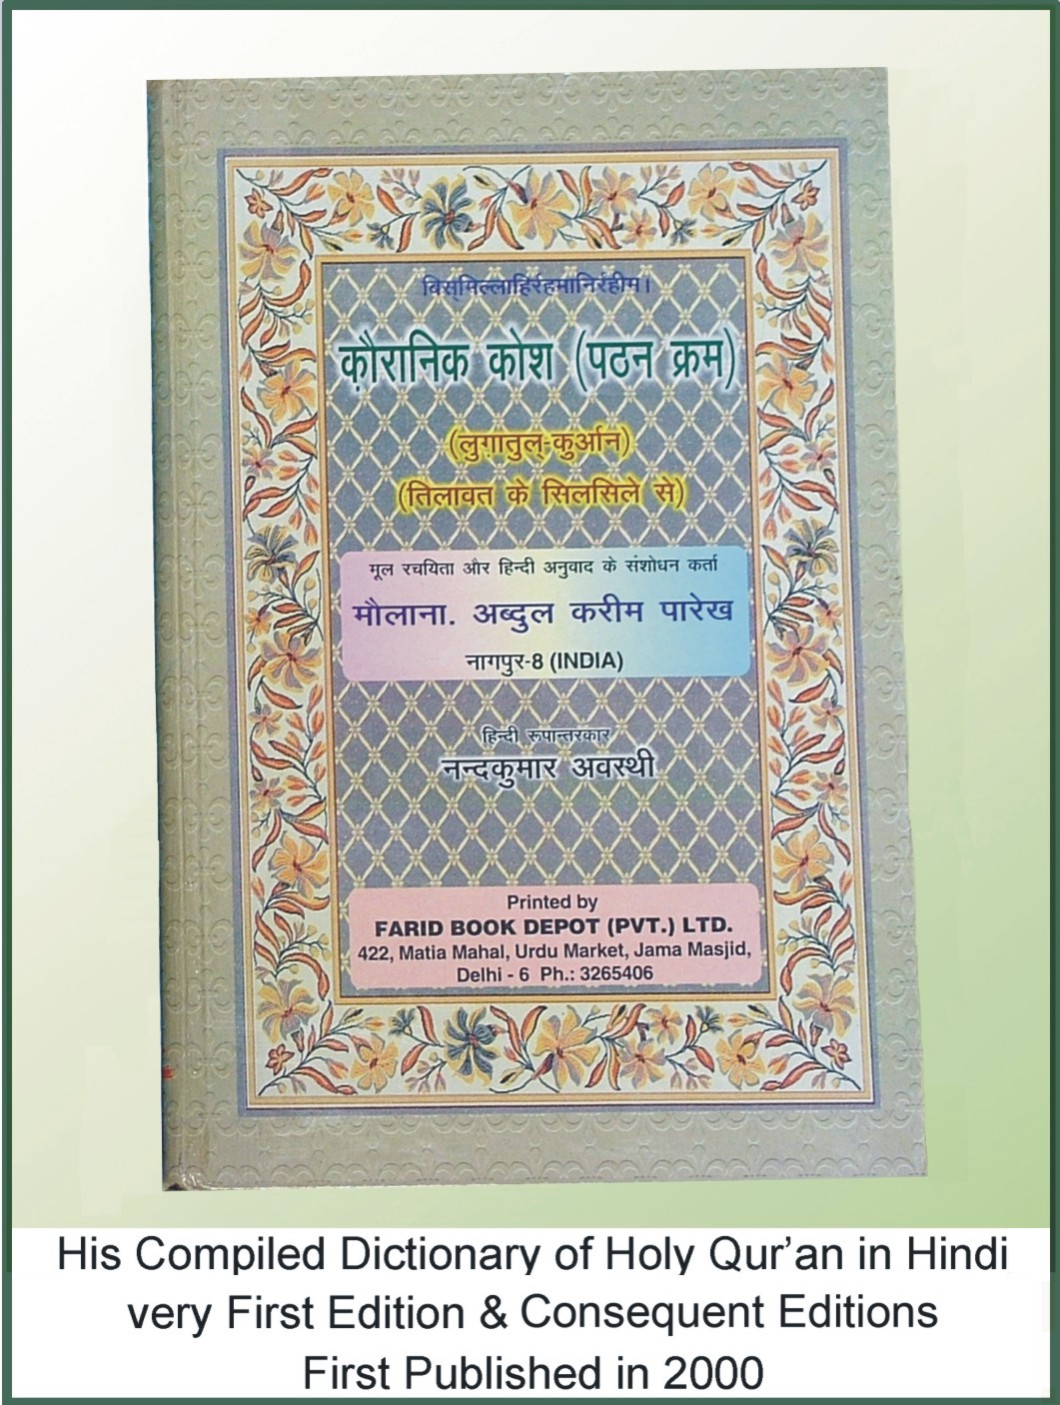 Compiled Dictionary of The Holy Qur'an (Hindi) First Edition & Consequent Editions Published in 2000